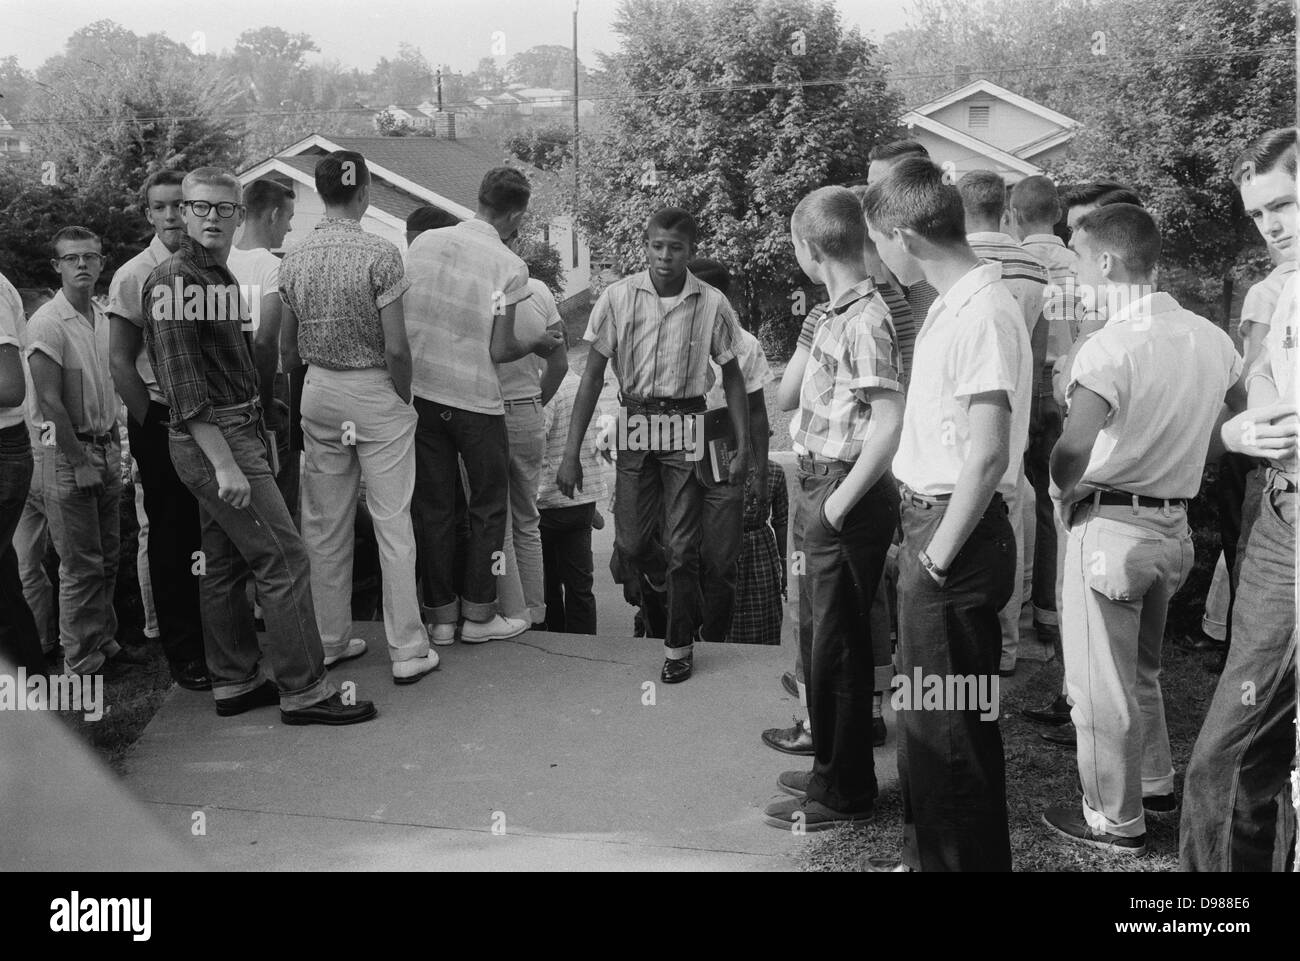 School integration conflicts, Little Rock, Arkansas. Photograph shows an African American boy walking through a crowd of white boys during a period of violence related to school integration. 1957. Thomas J O'Halloran, photographer. Stock Photo